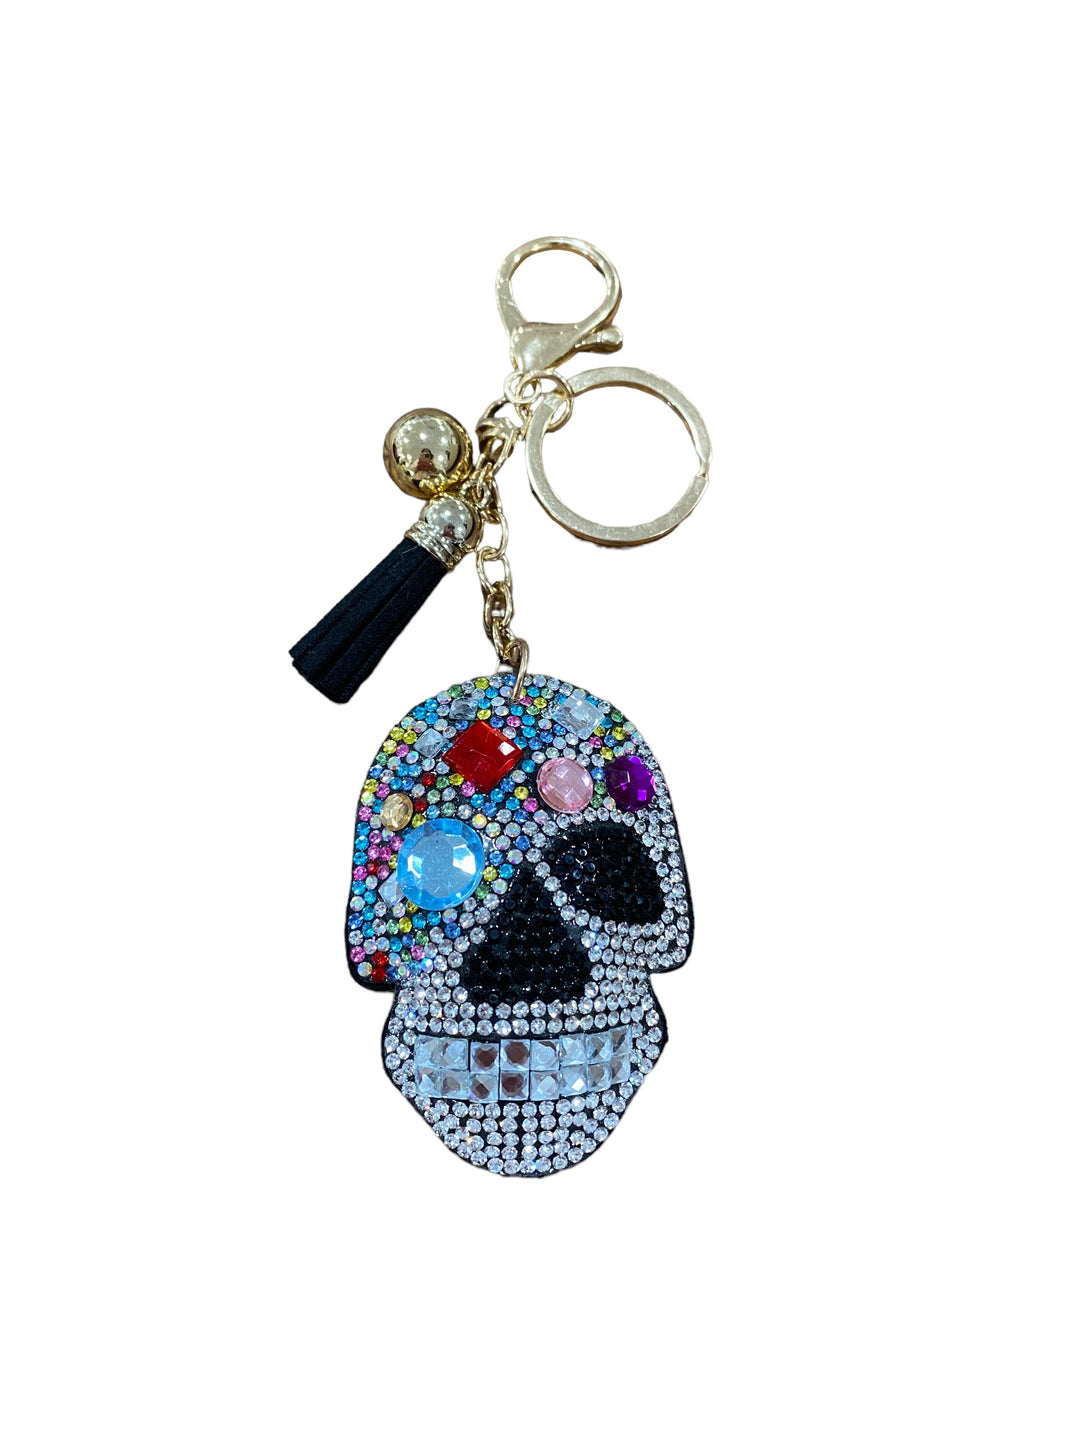 CRYSTAL SKULL KEY CHAIN-SILVER - Kingfisher Road - Online Boutique